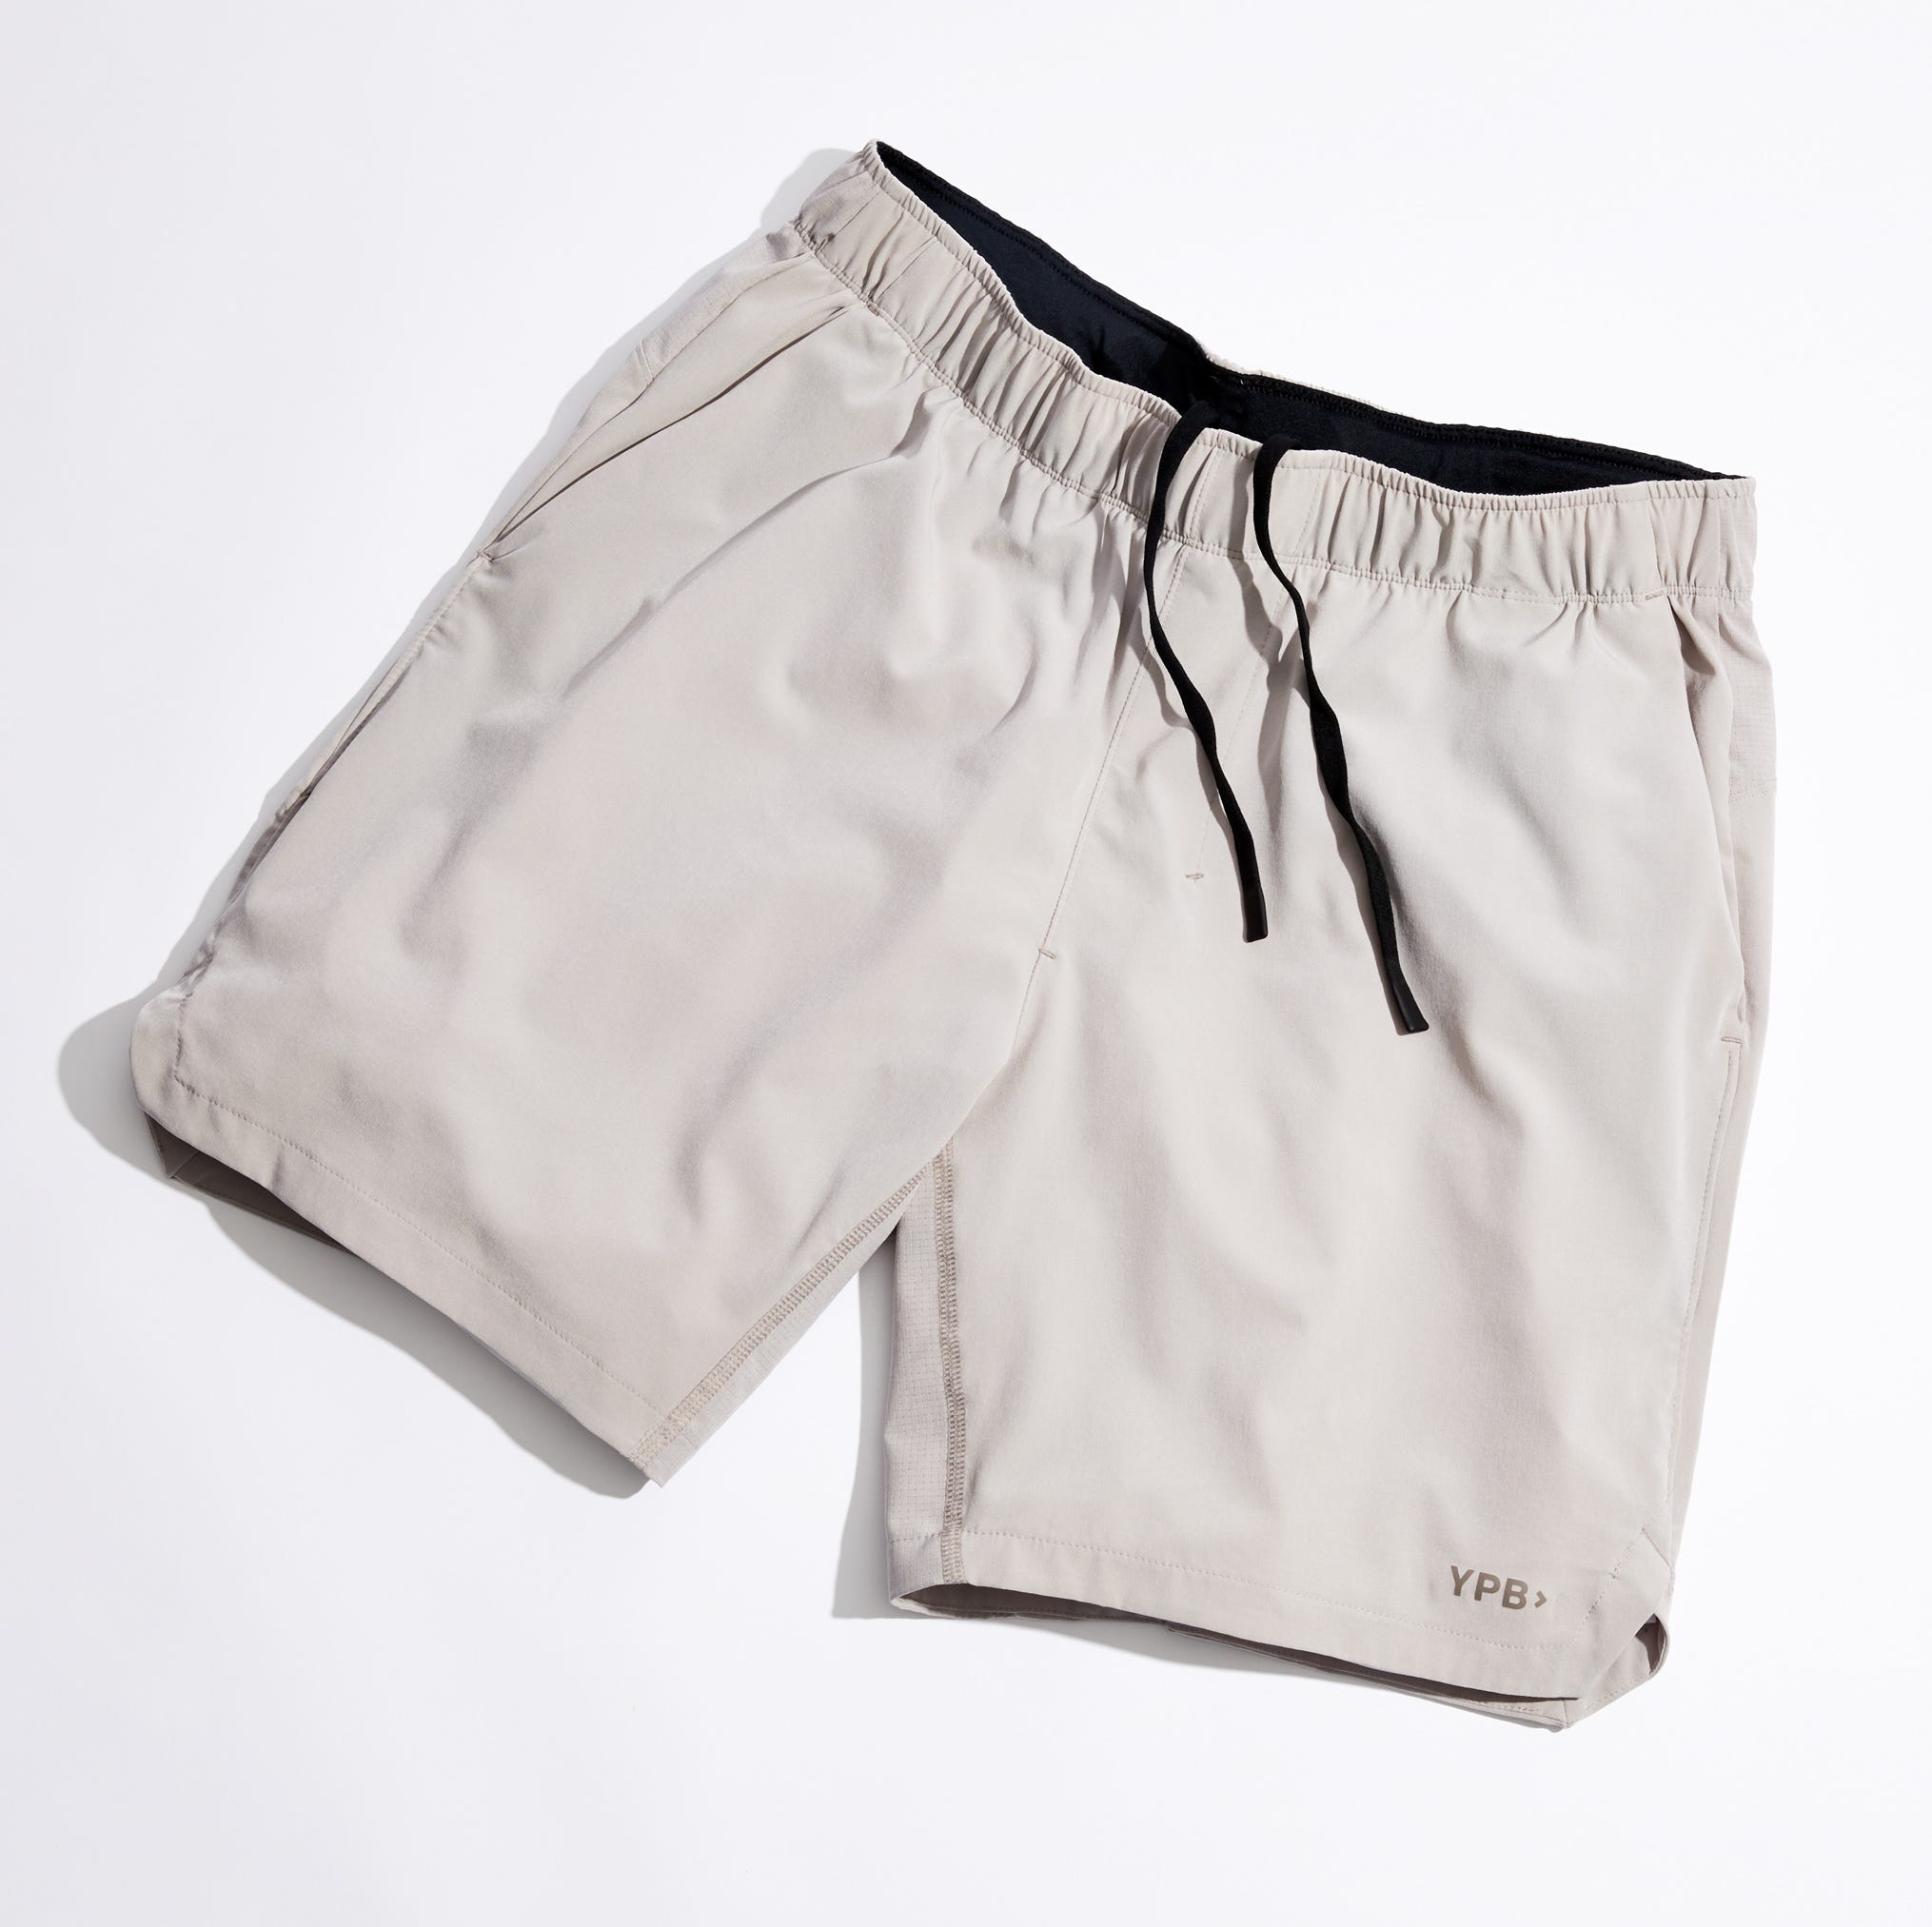 Abercrombie & Fitch's Training Shorts Are Truly Impressive